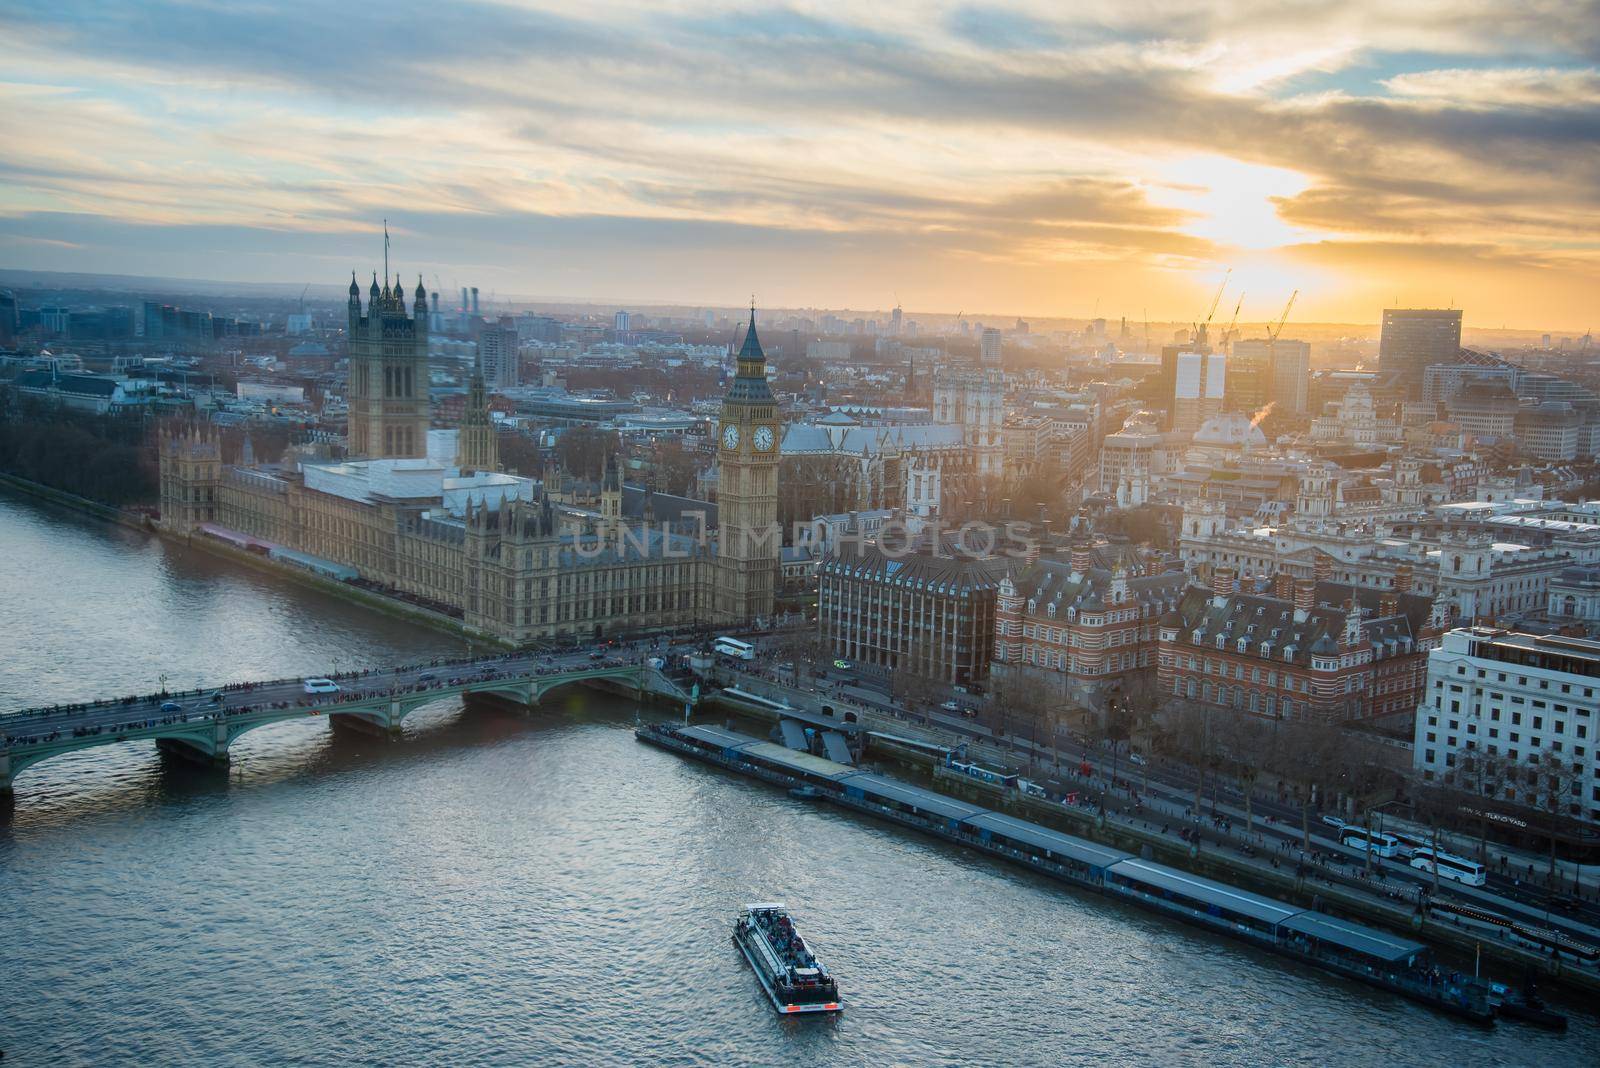 London, UK - February 4, 2017: The Parliament boasting in the skyline during a gorgeous sunset from an aerial view of downtown London.